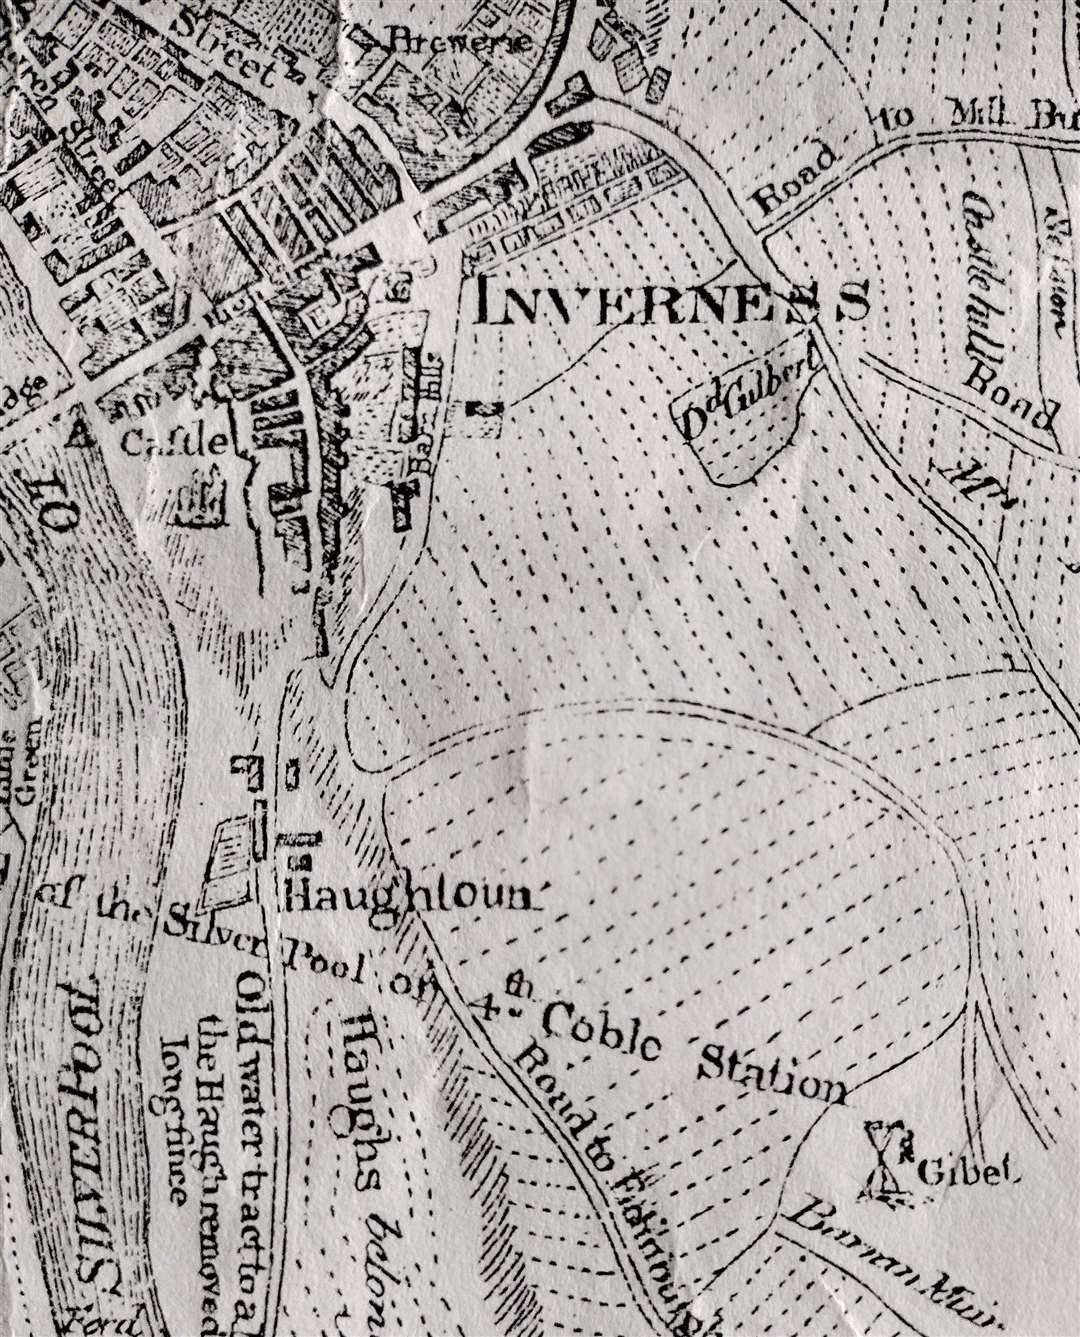 Map showing gibbet